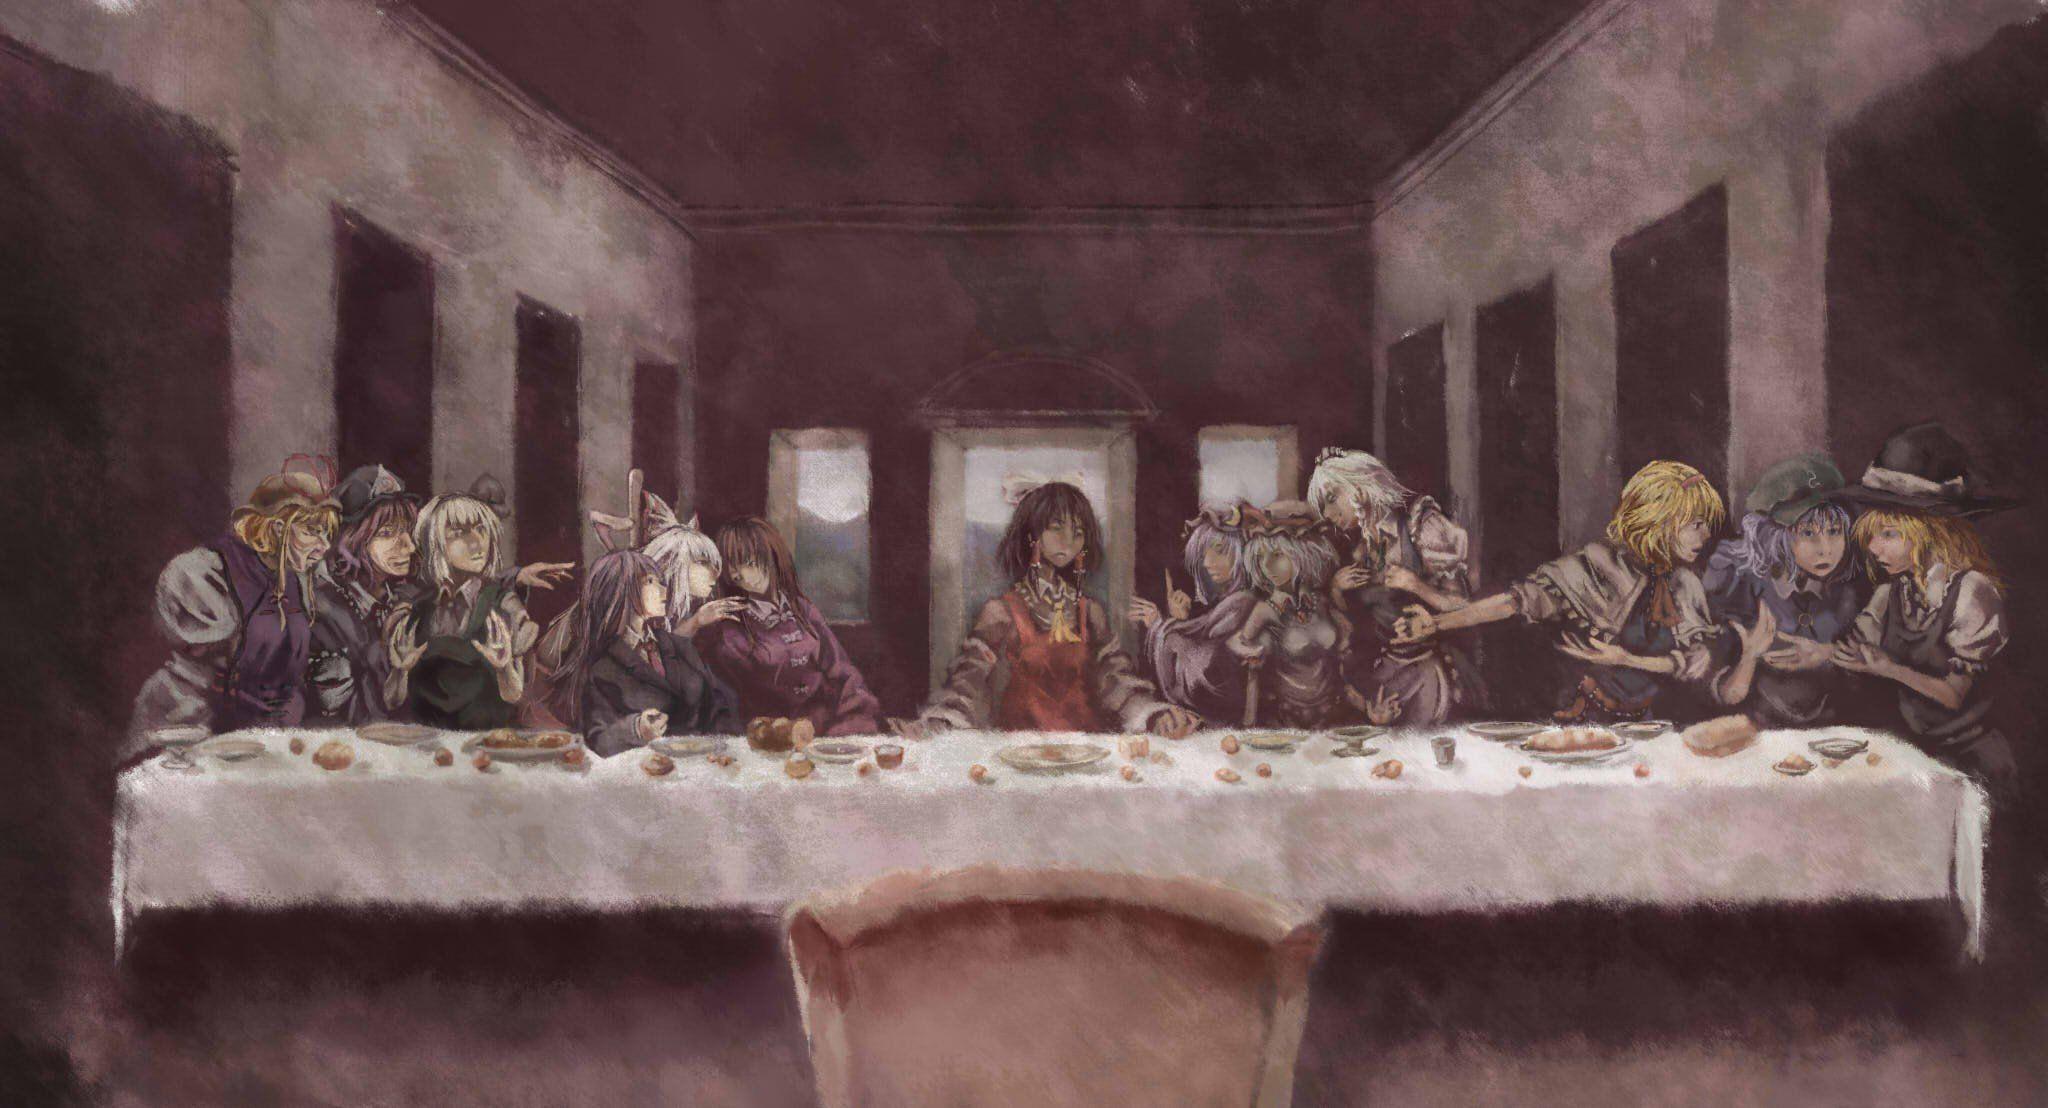 The Last Supper HD Wallpaper Desktop Image and Photo